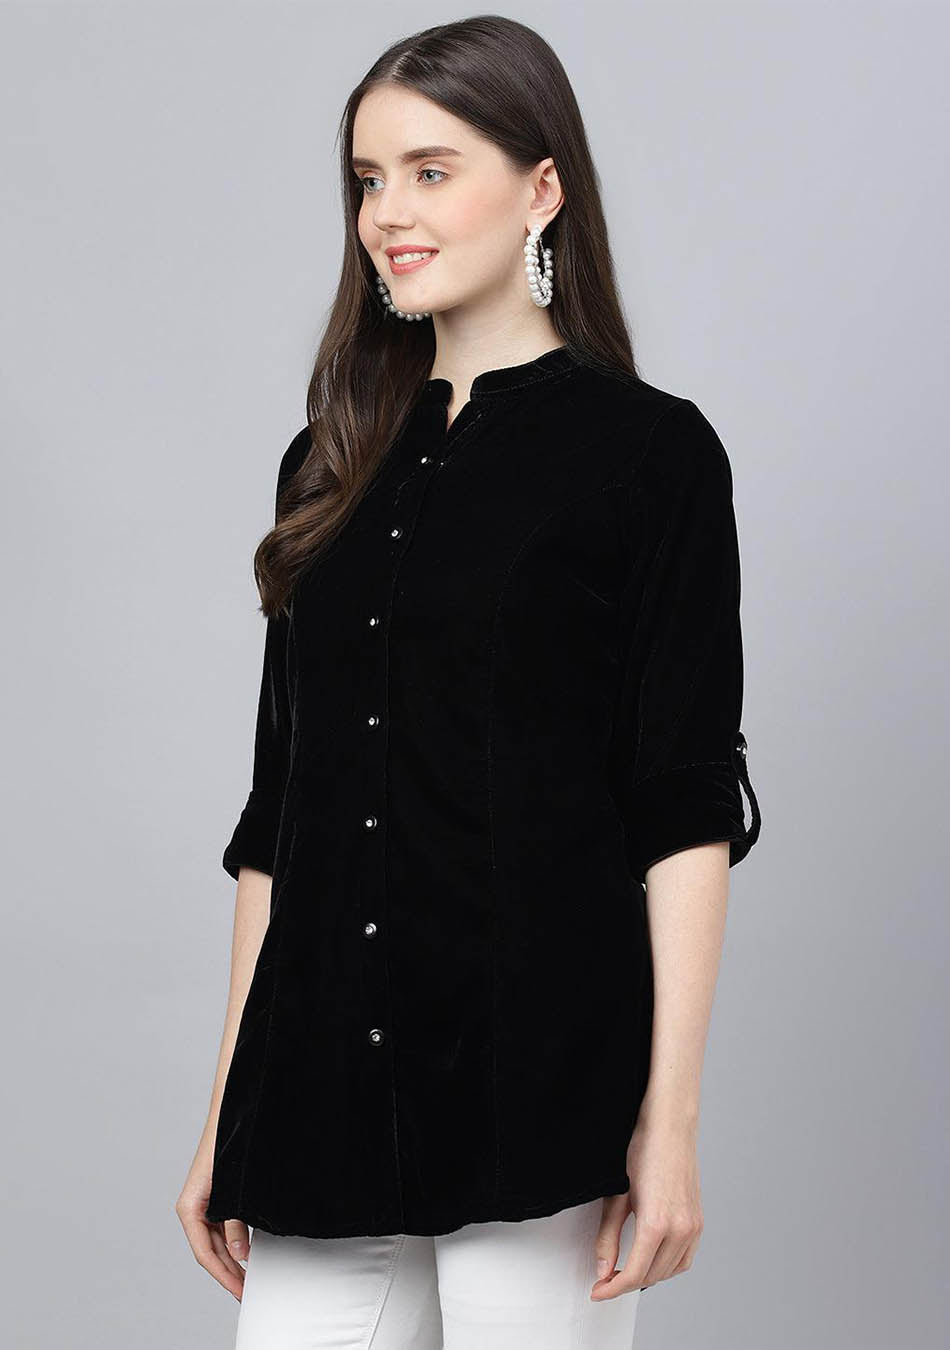 Black Solid Velvet A-line Shirts Style Top